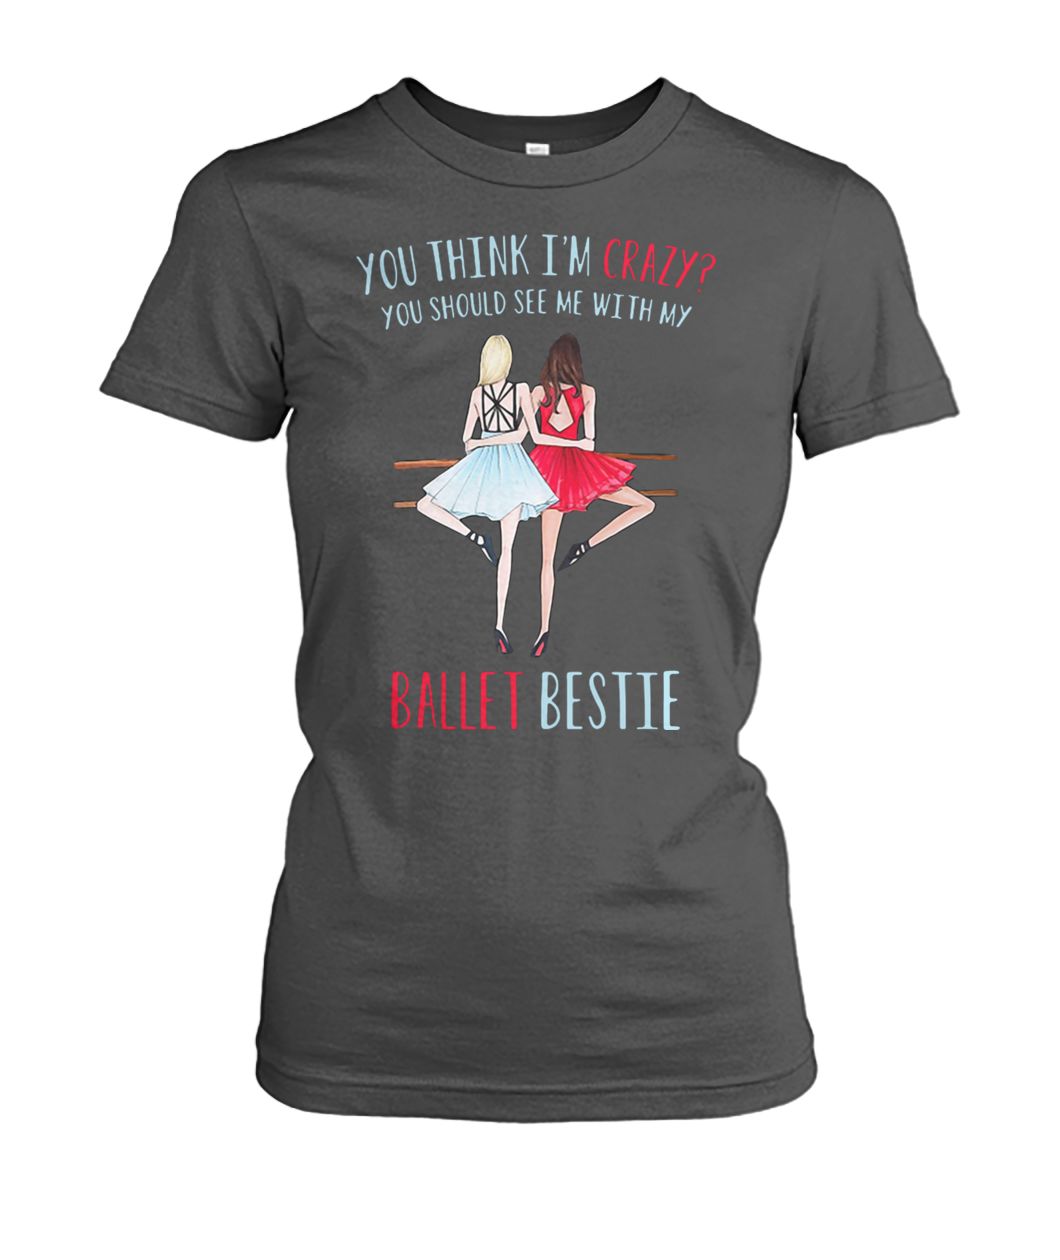 You think I'm crazy you should see me with my ballet bestie women's crew tee